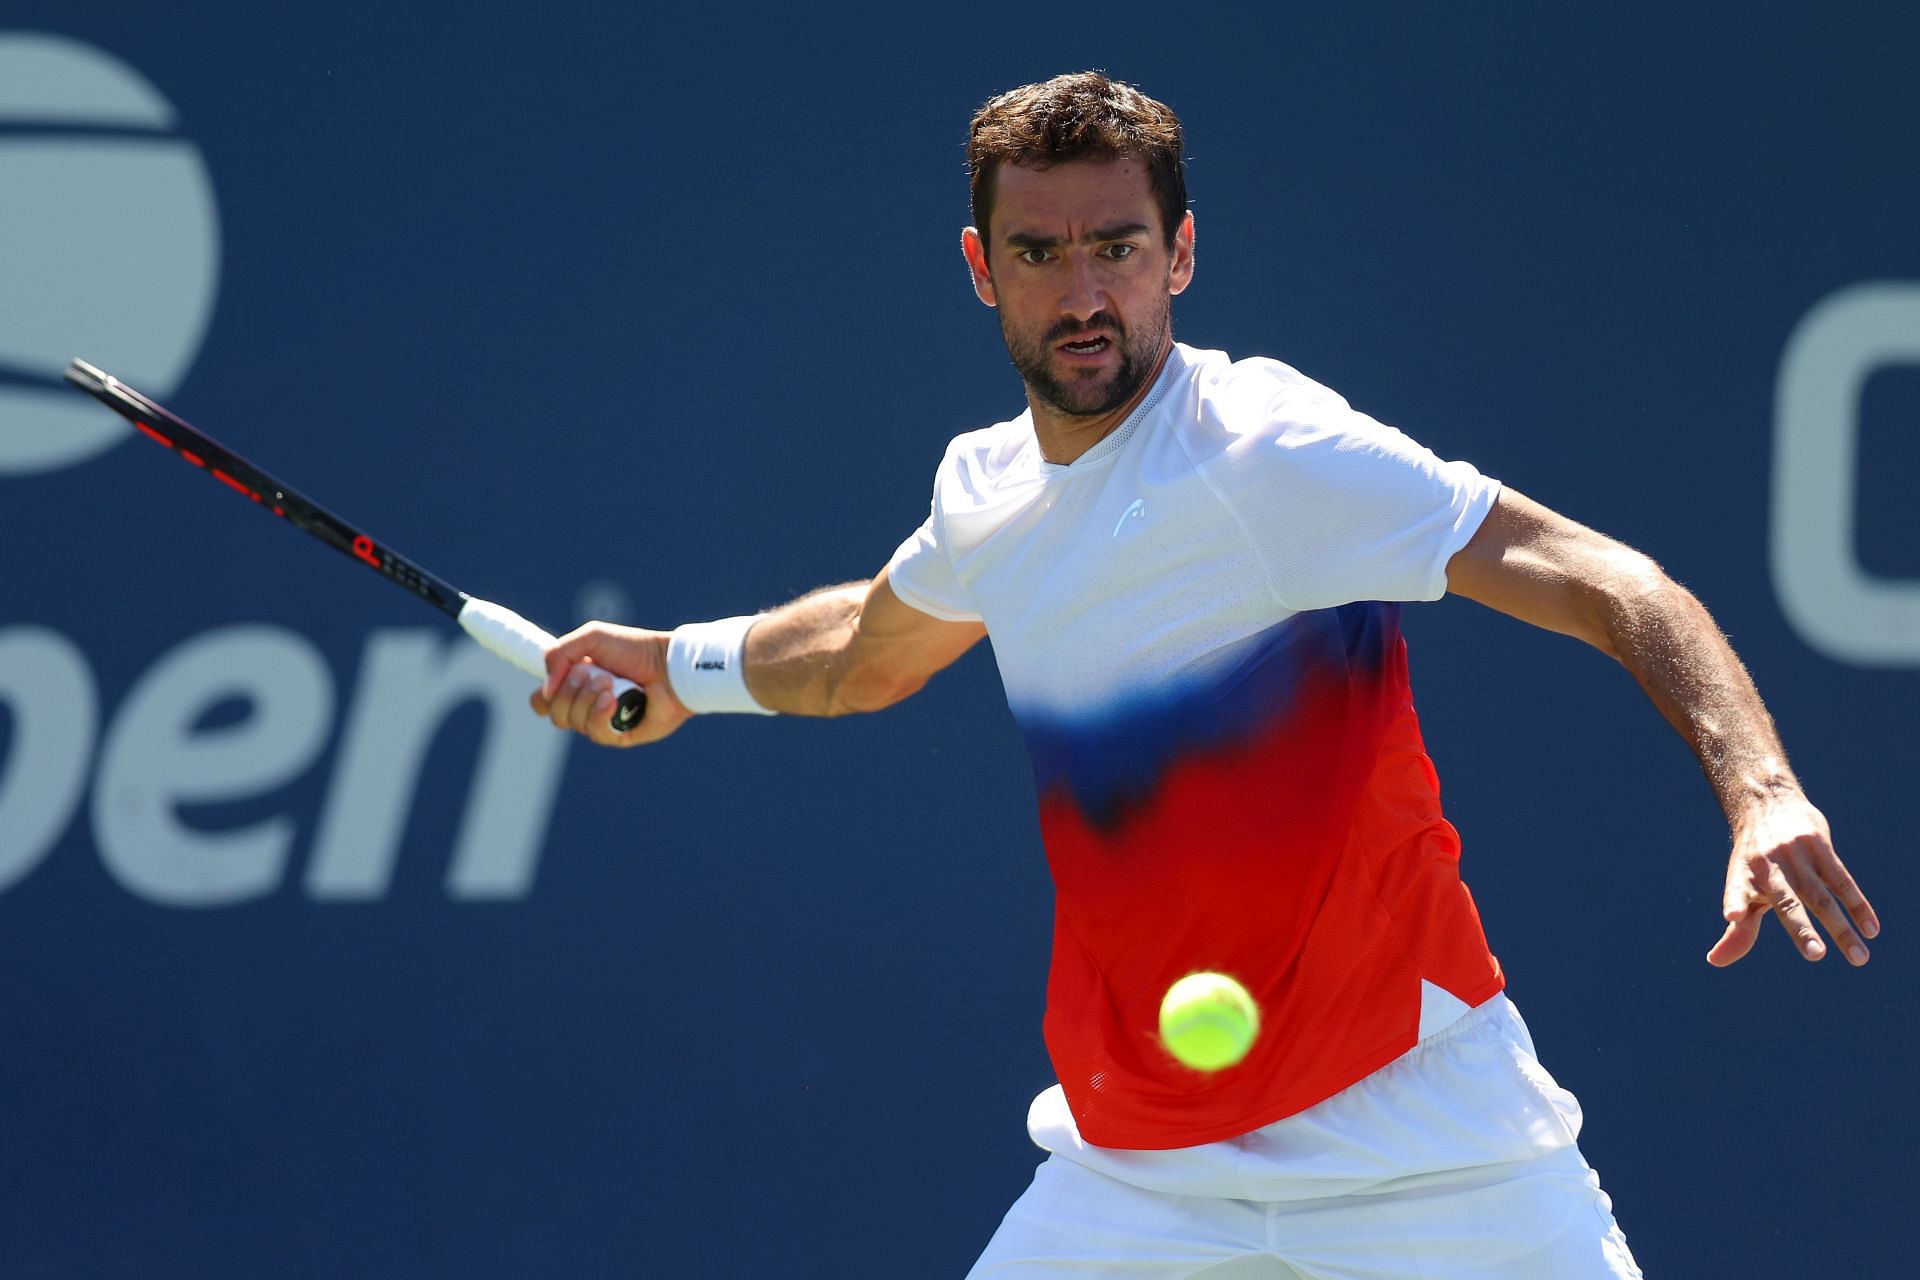 Marin Cilic plays a forehand against Albert Ramos-Vinolas of Spain at the 2022 US Open - Day 4